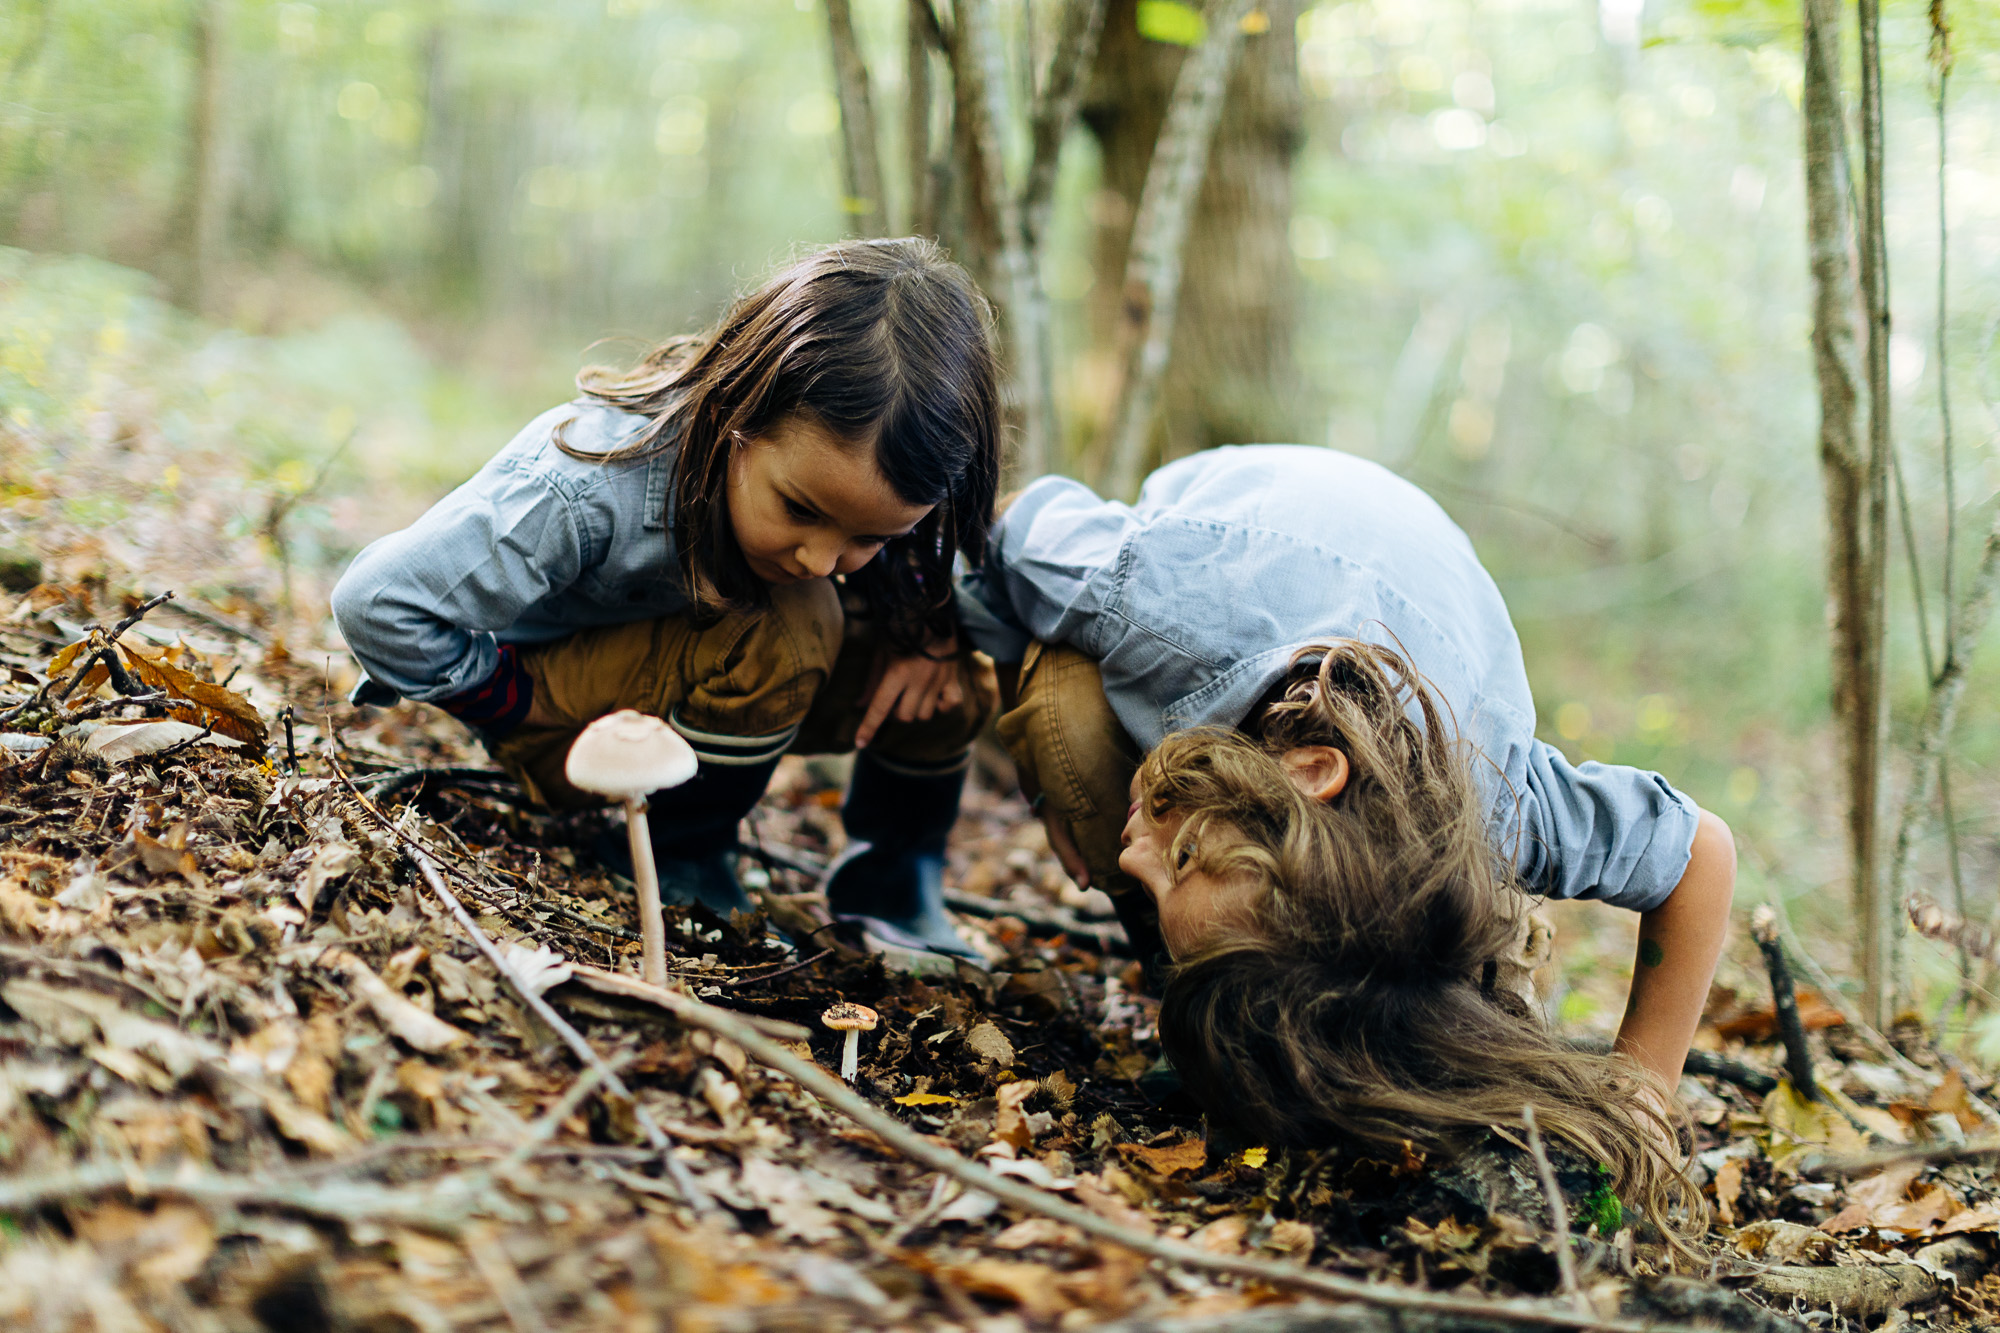 Children studying a mushroom in a forest